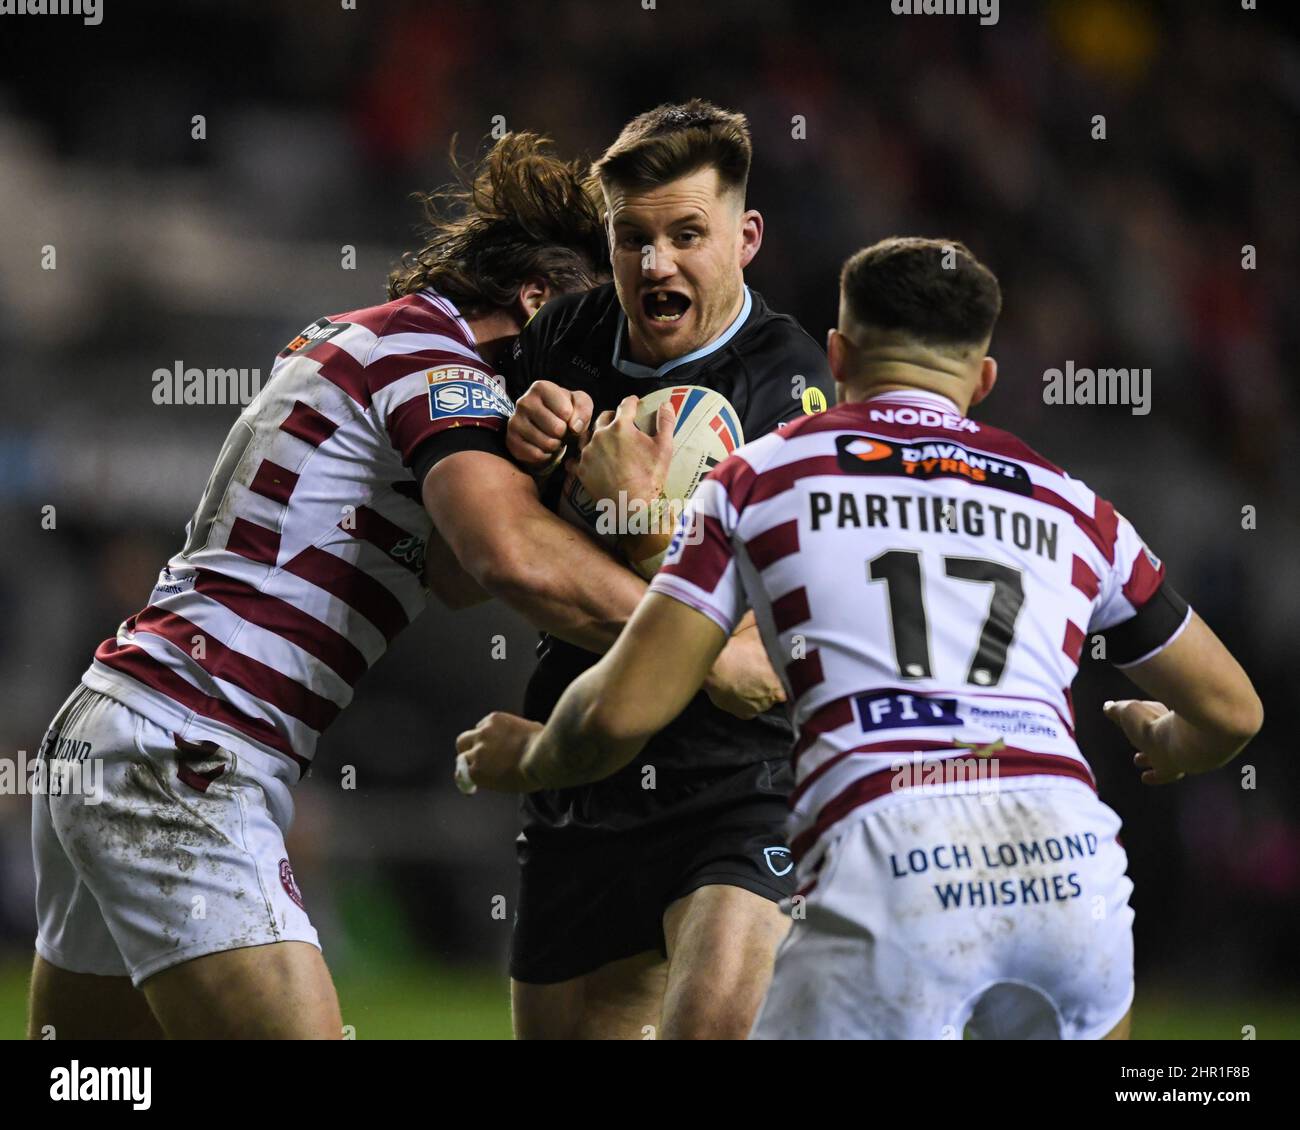 Wigan, UK. 24th Feb, 2022. Joe Greenwood #15 of Huddersfield Giants looks for a way past Liam Byrne #20 and Oliver Partington #17 of Wigan Warriors in Wigan, United Kingdom on 2/24/2022. (Photo by SW Photo via/News Images/Sipa USA) Credit: Sipa USA/Alamy Live News Stock Photo